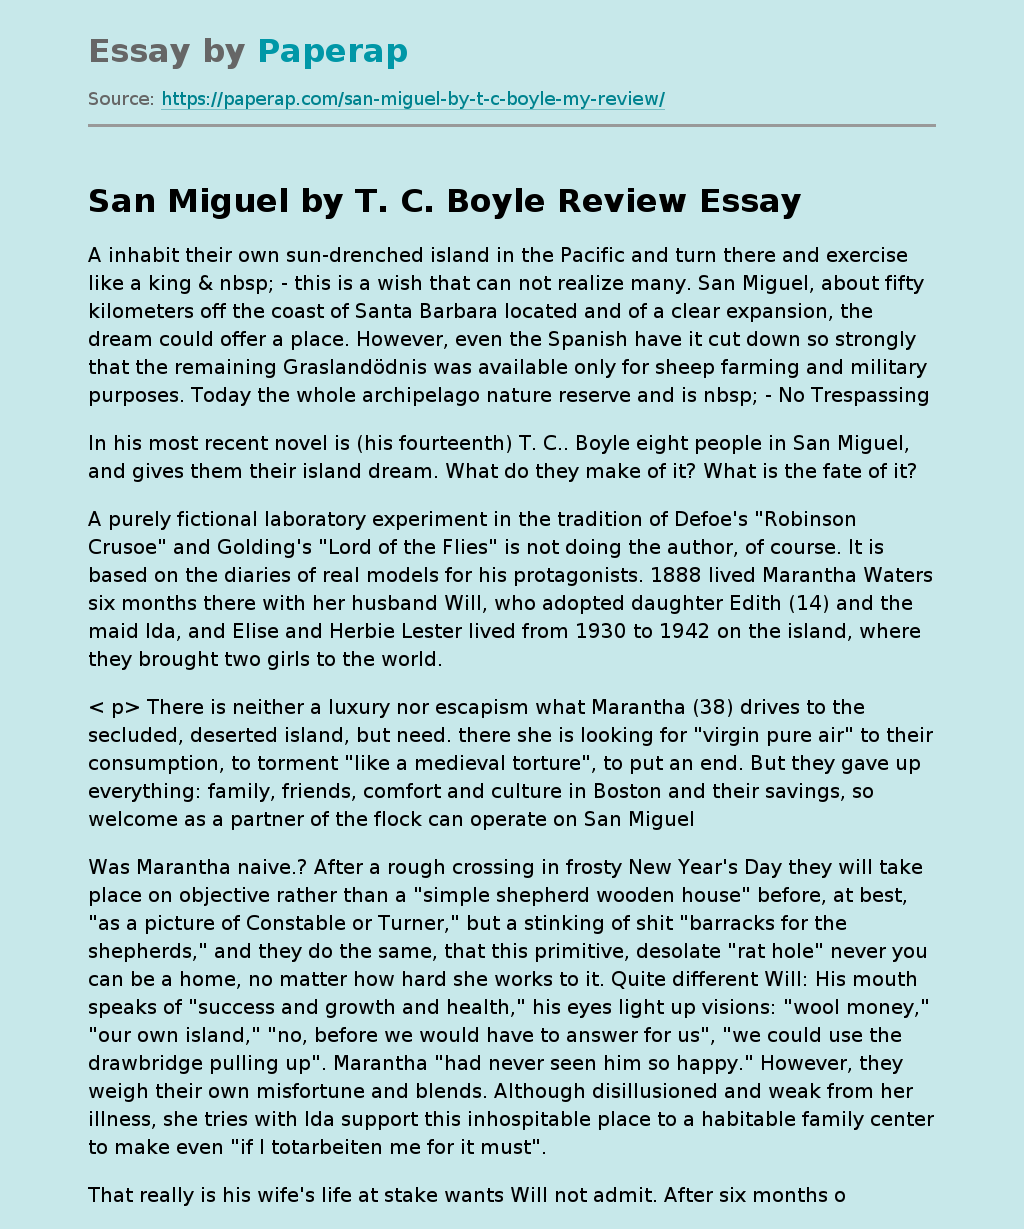 San Miguel by T. C. Boyle Review